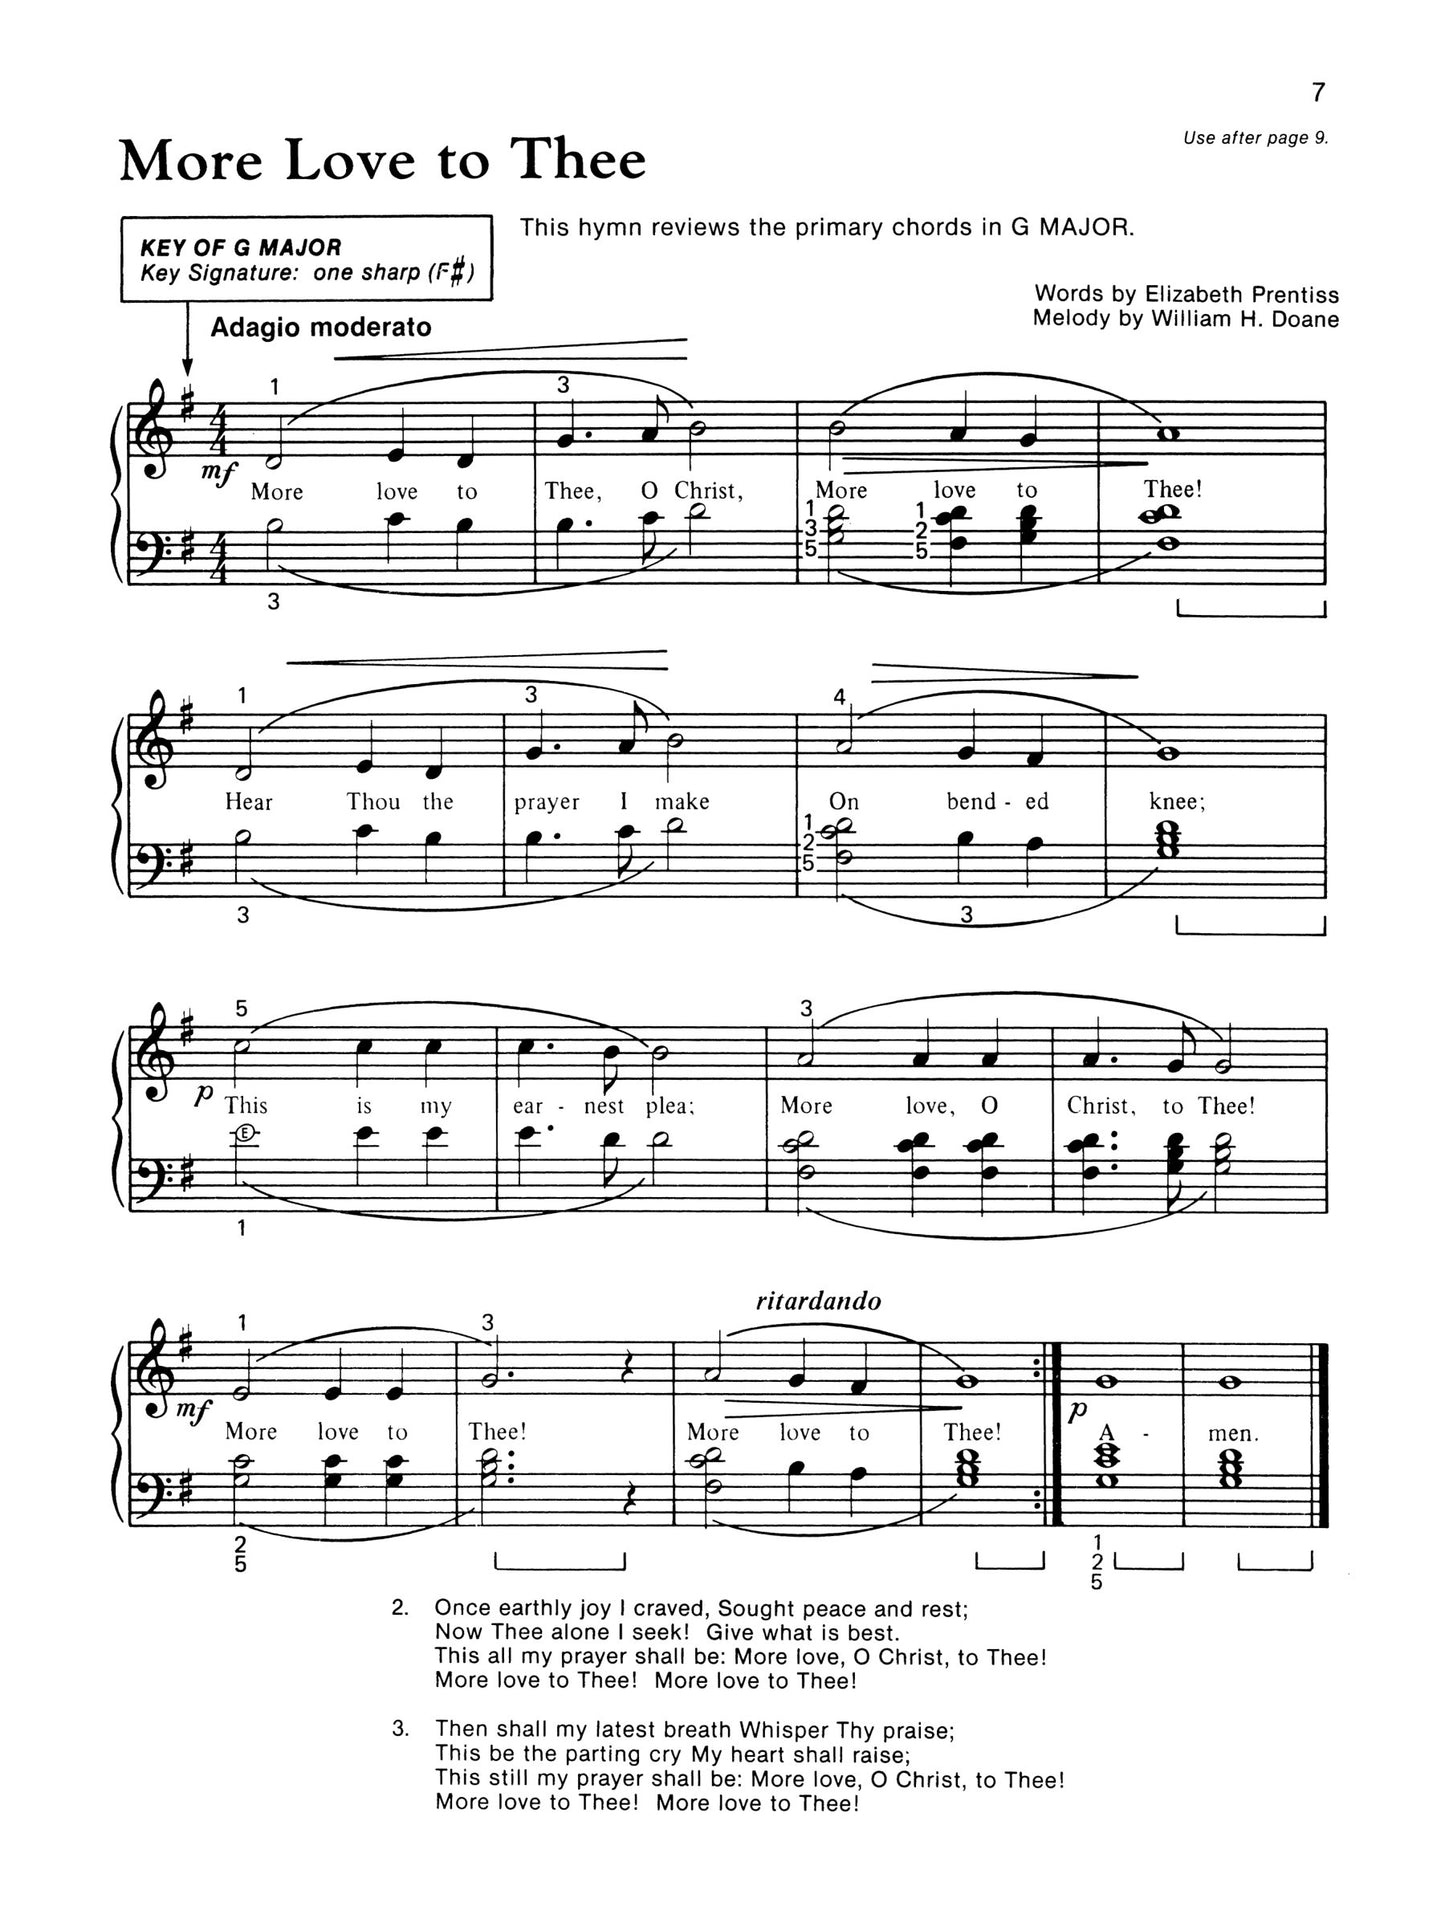 Alfred's Basic Piano Library - Hymn Book Level 3